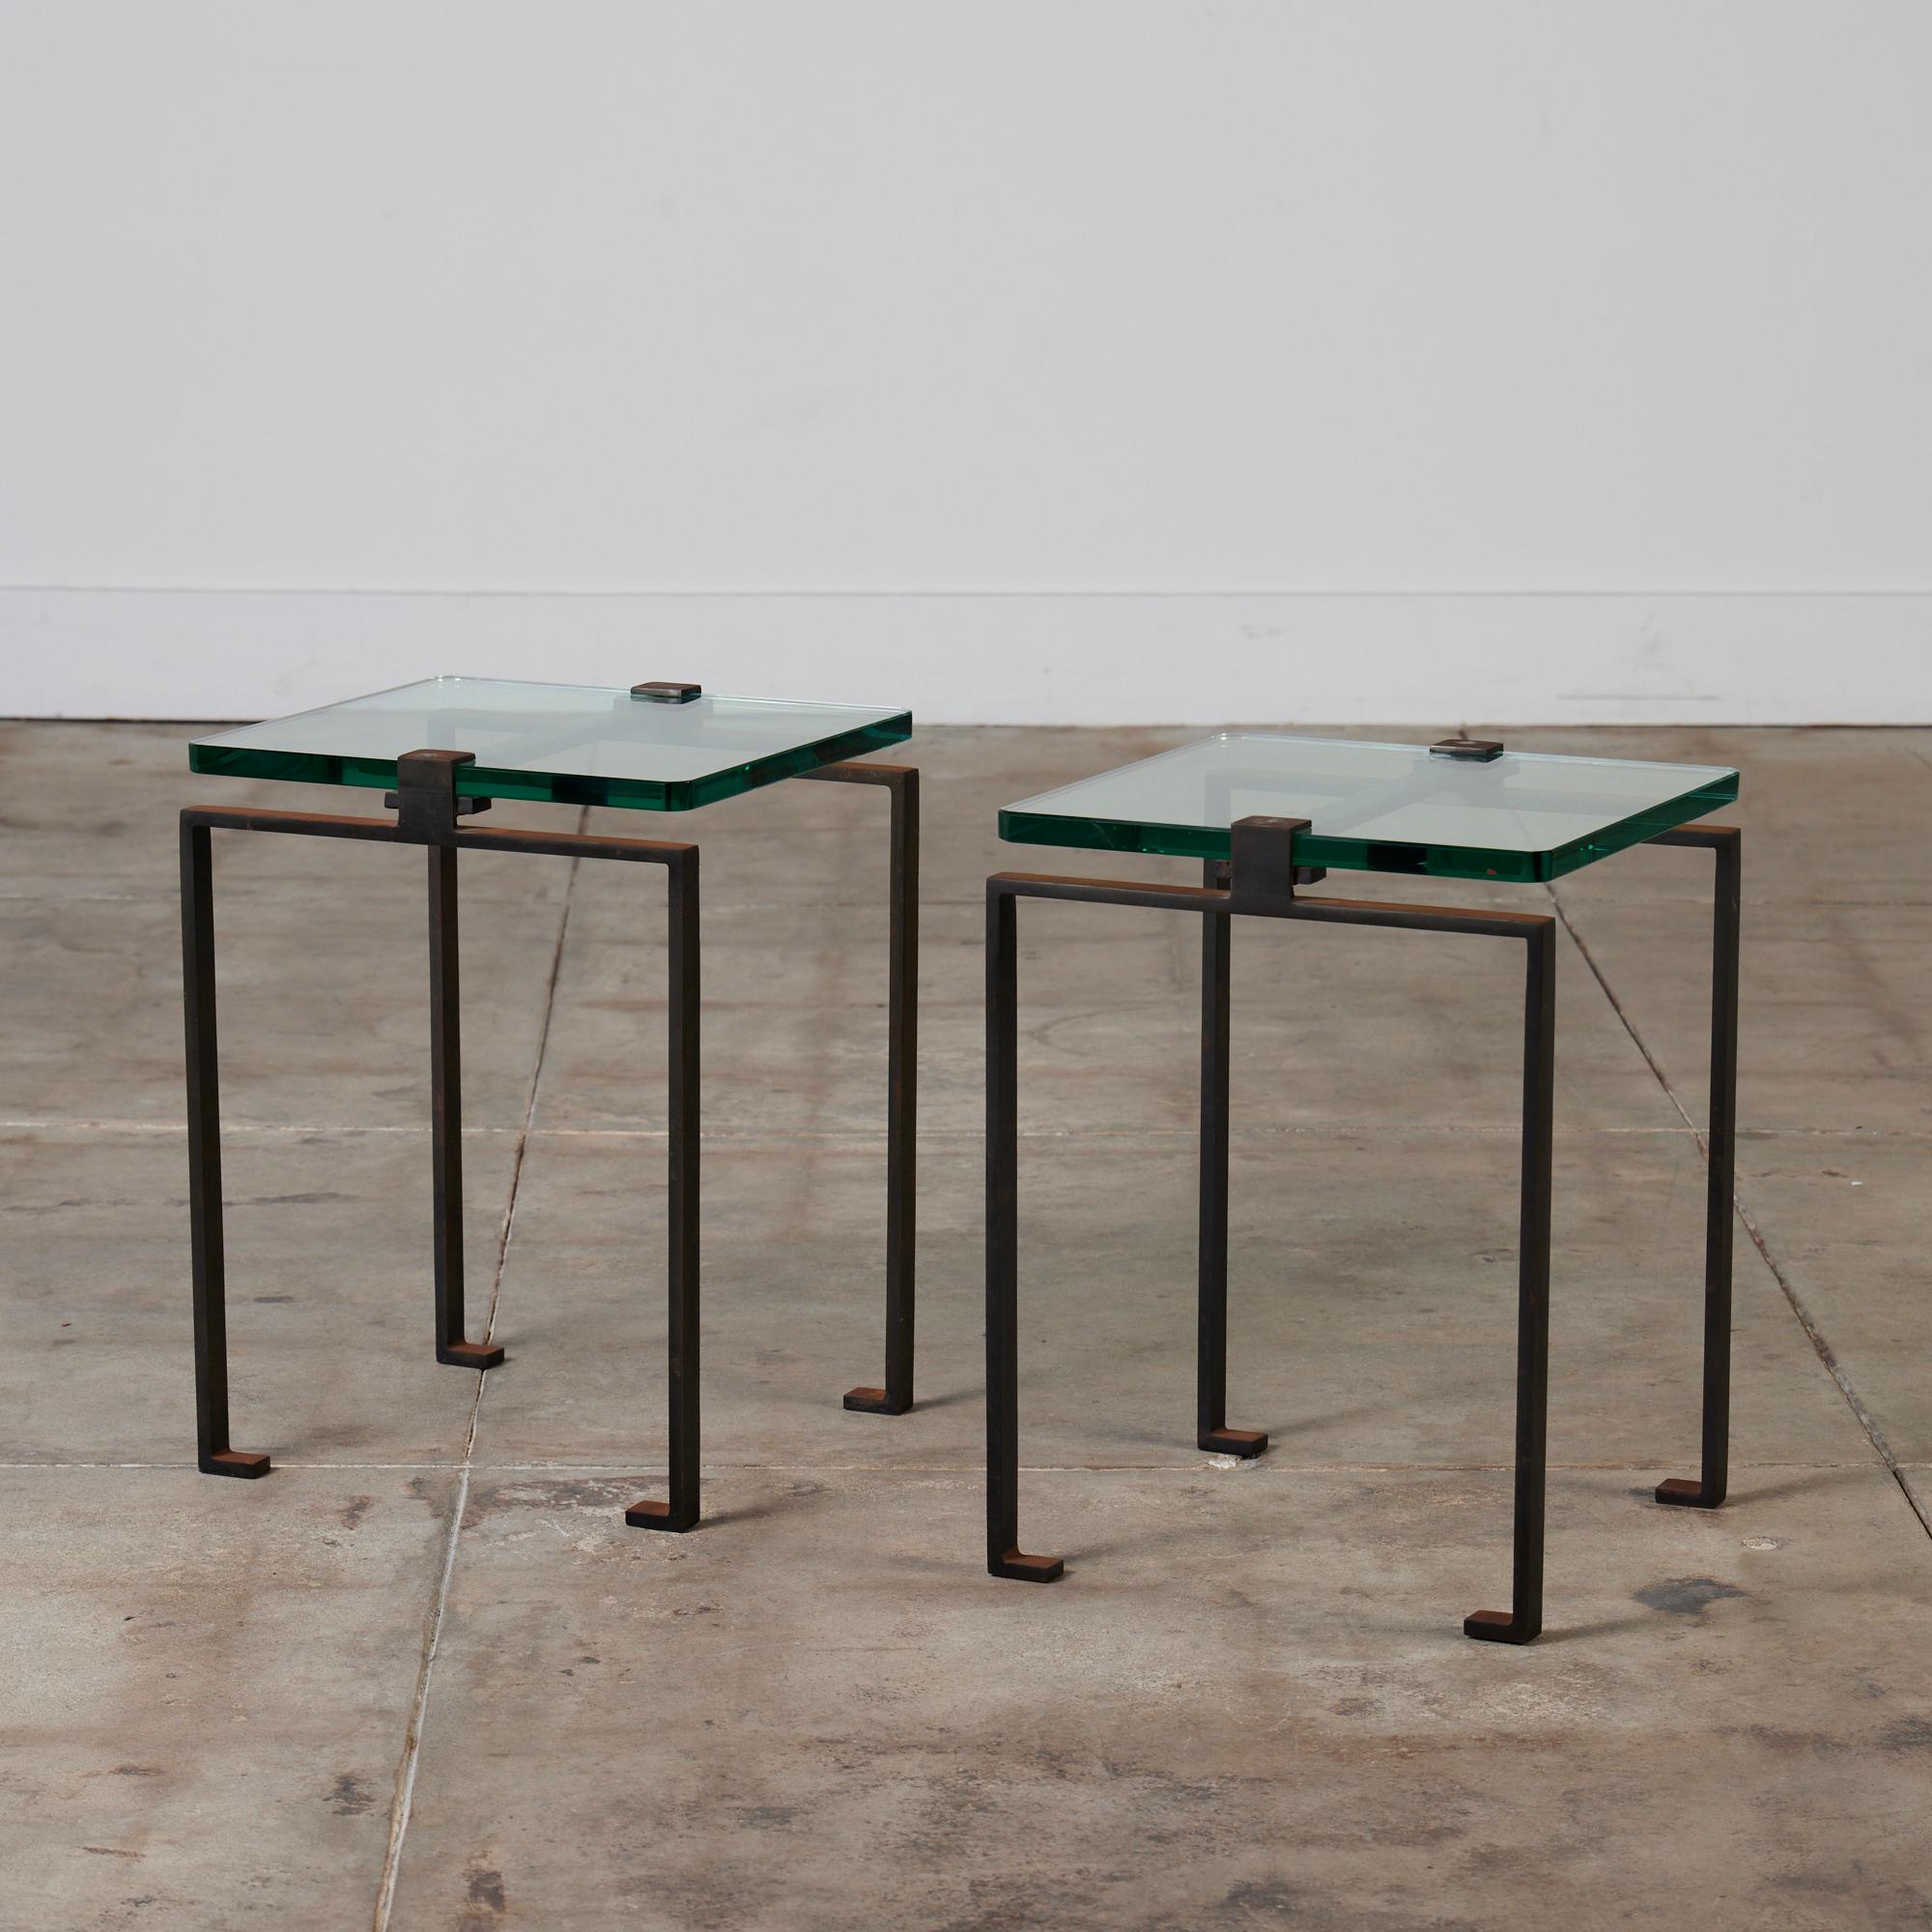 A pair of glass and oxidized steel side tables in the style of Jacques Quinet, c.1980's. The simplistic square shaped tables features a thick green glass. The glass is 